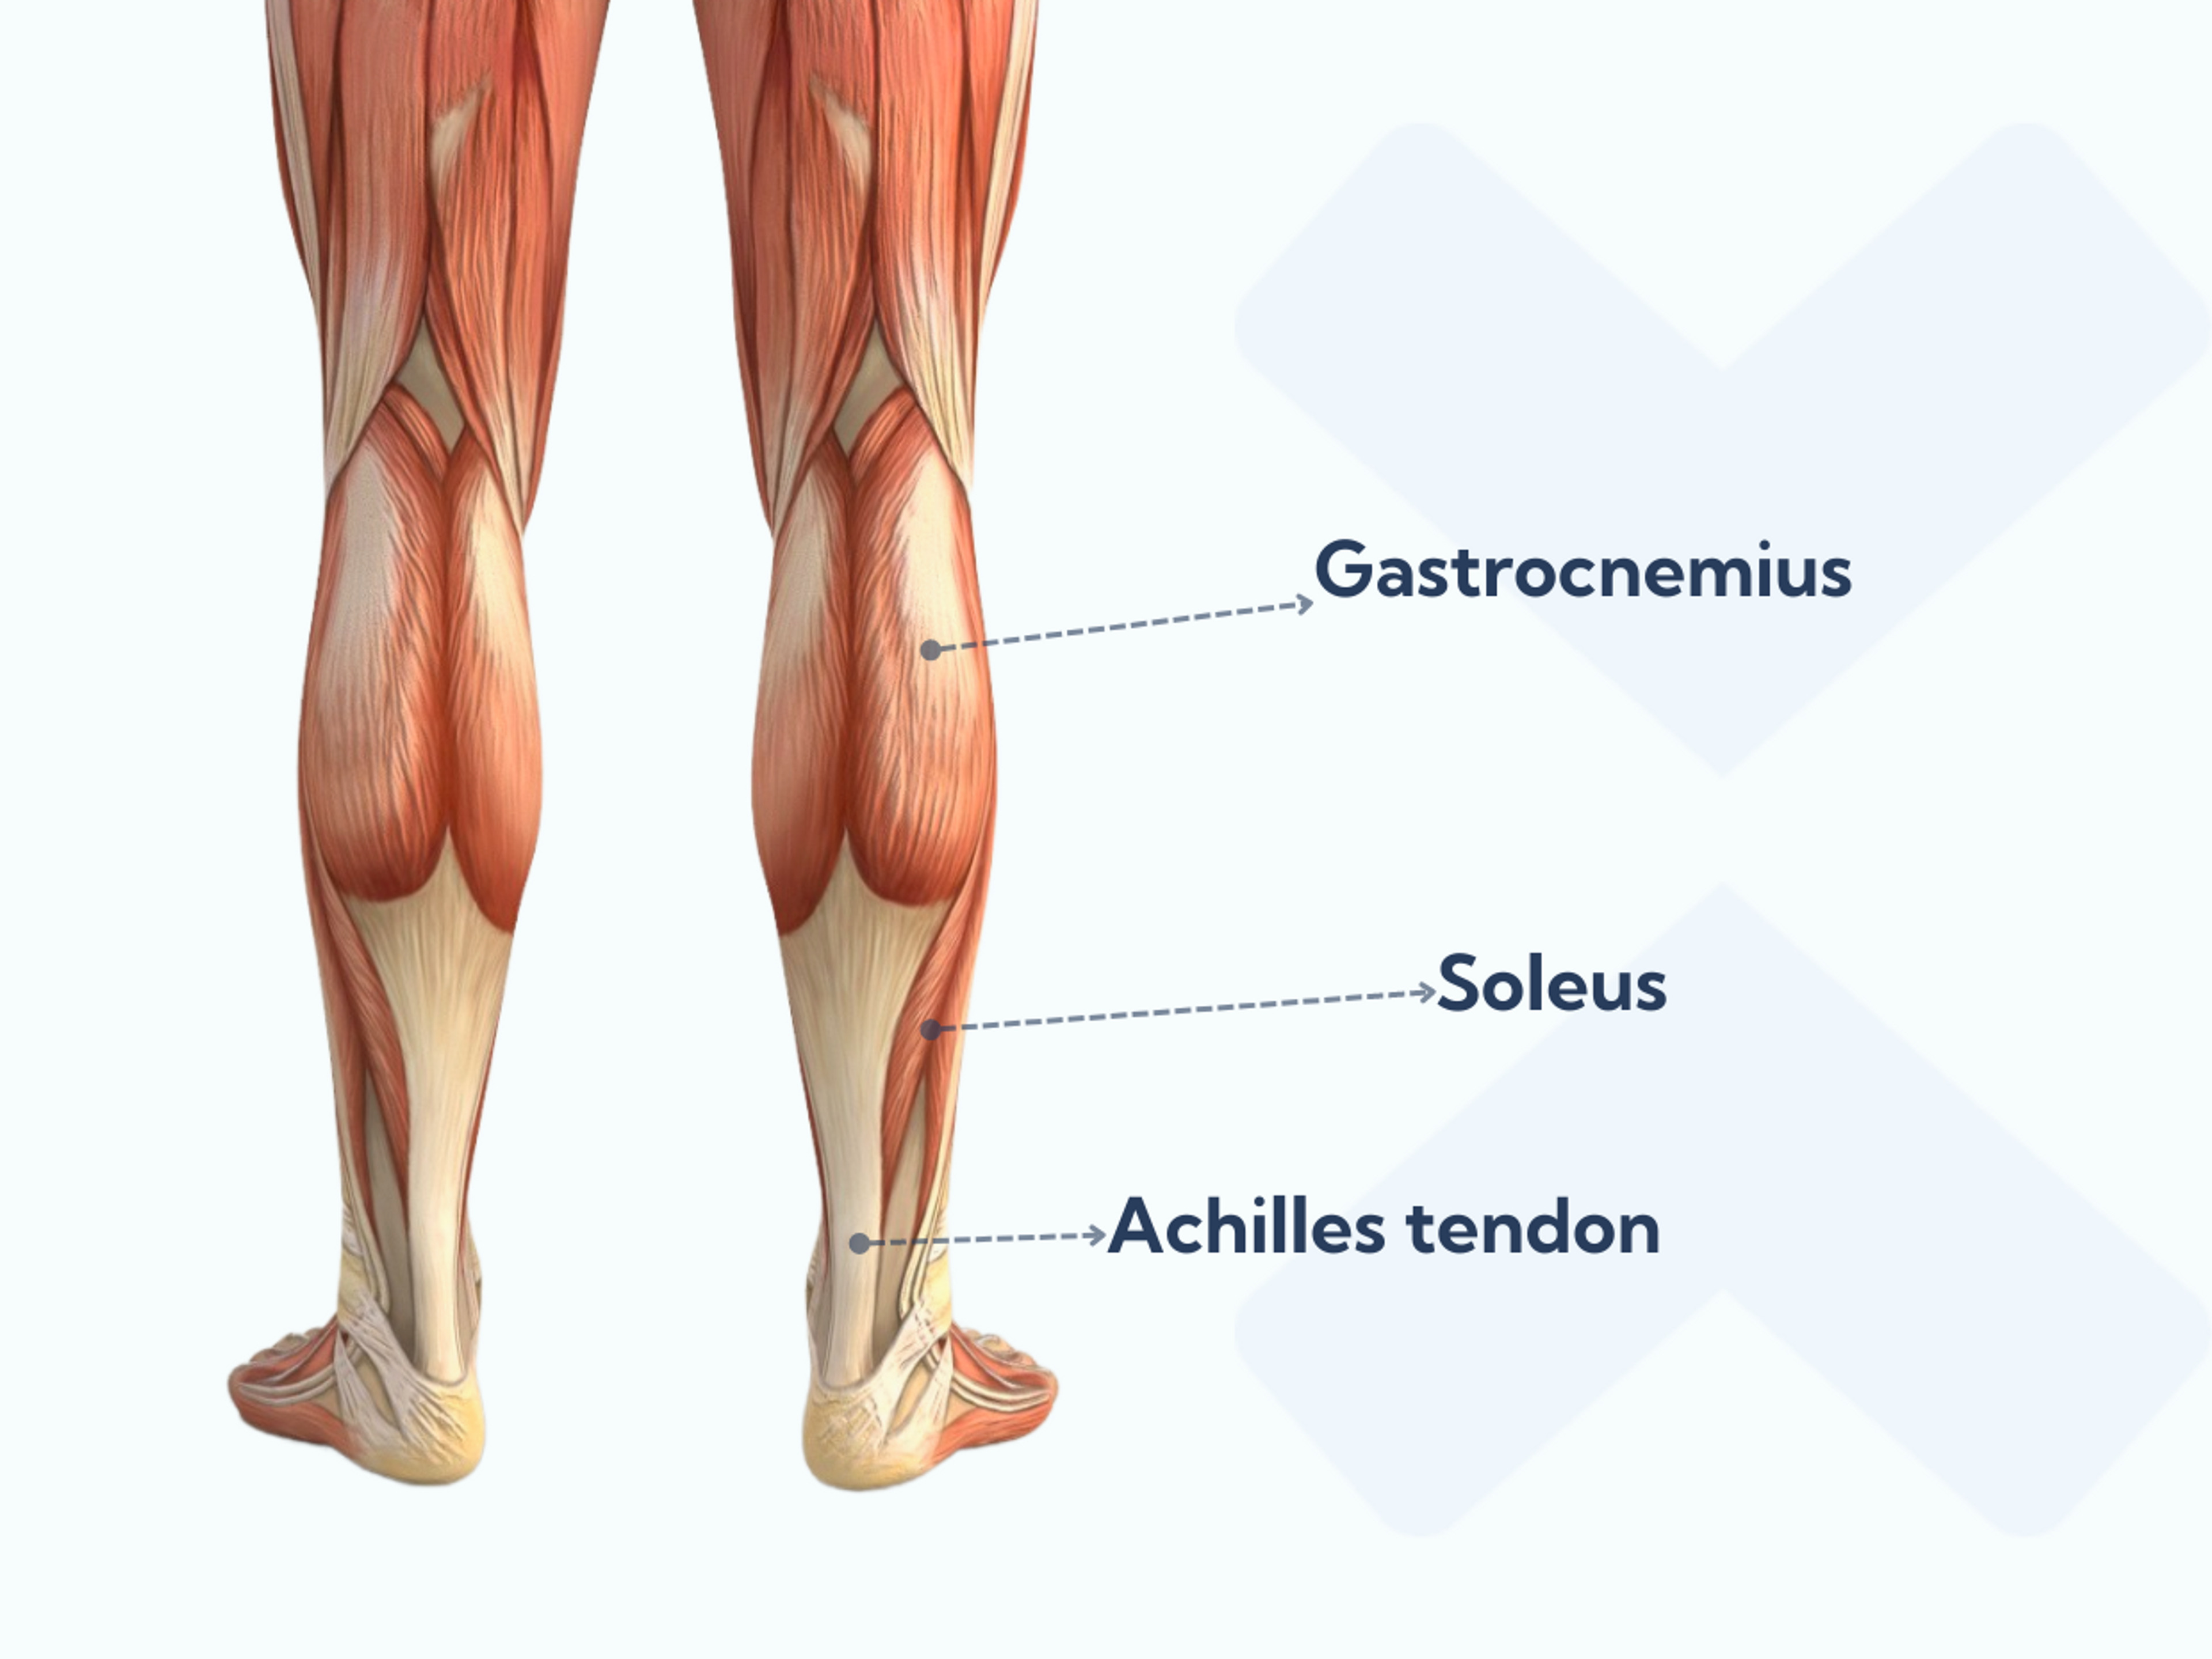 Anatomy of the calf and Achilles tendon